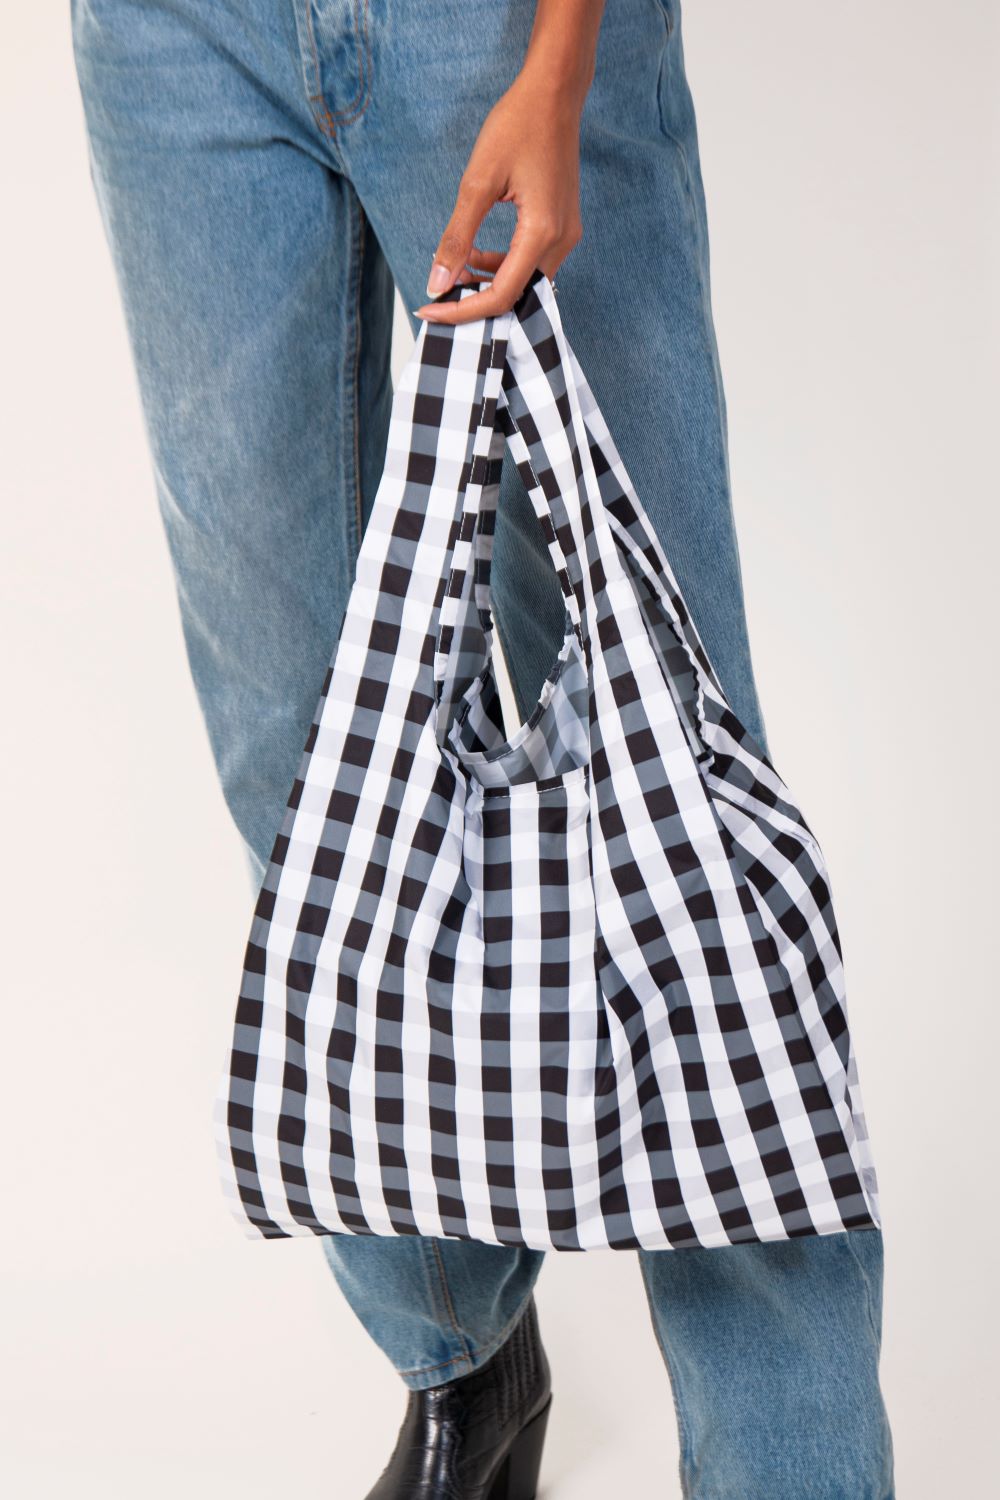 Kind Bag - Recycled Packable Shopping Bag - Gingham